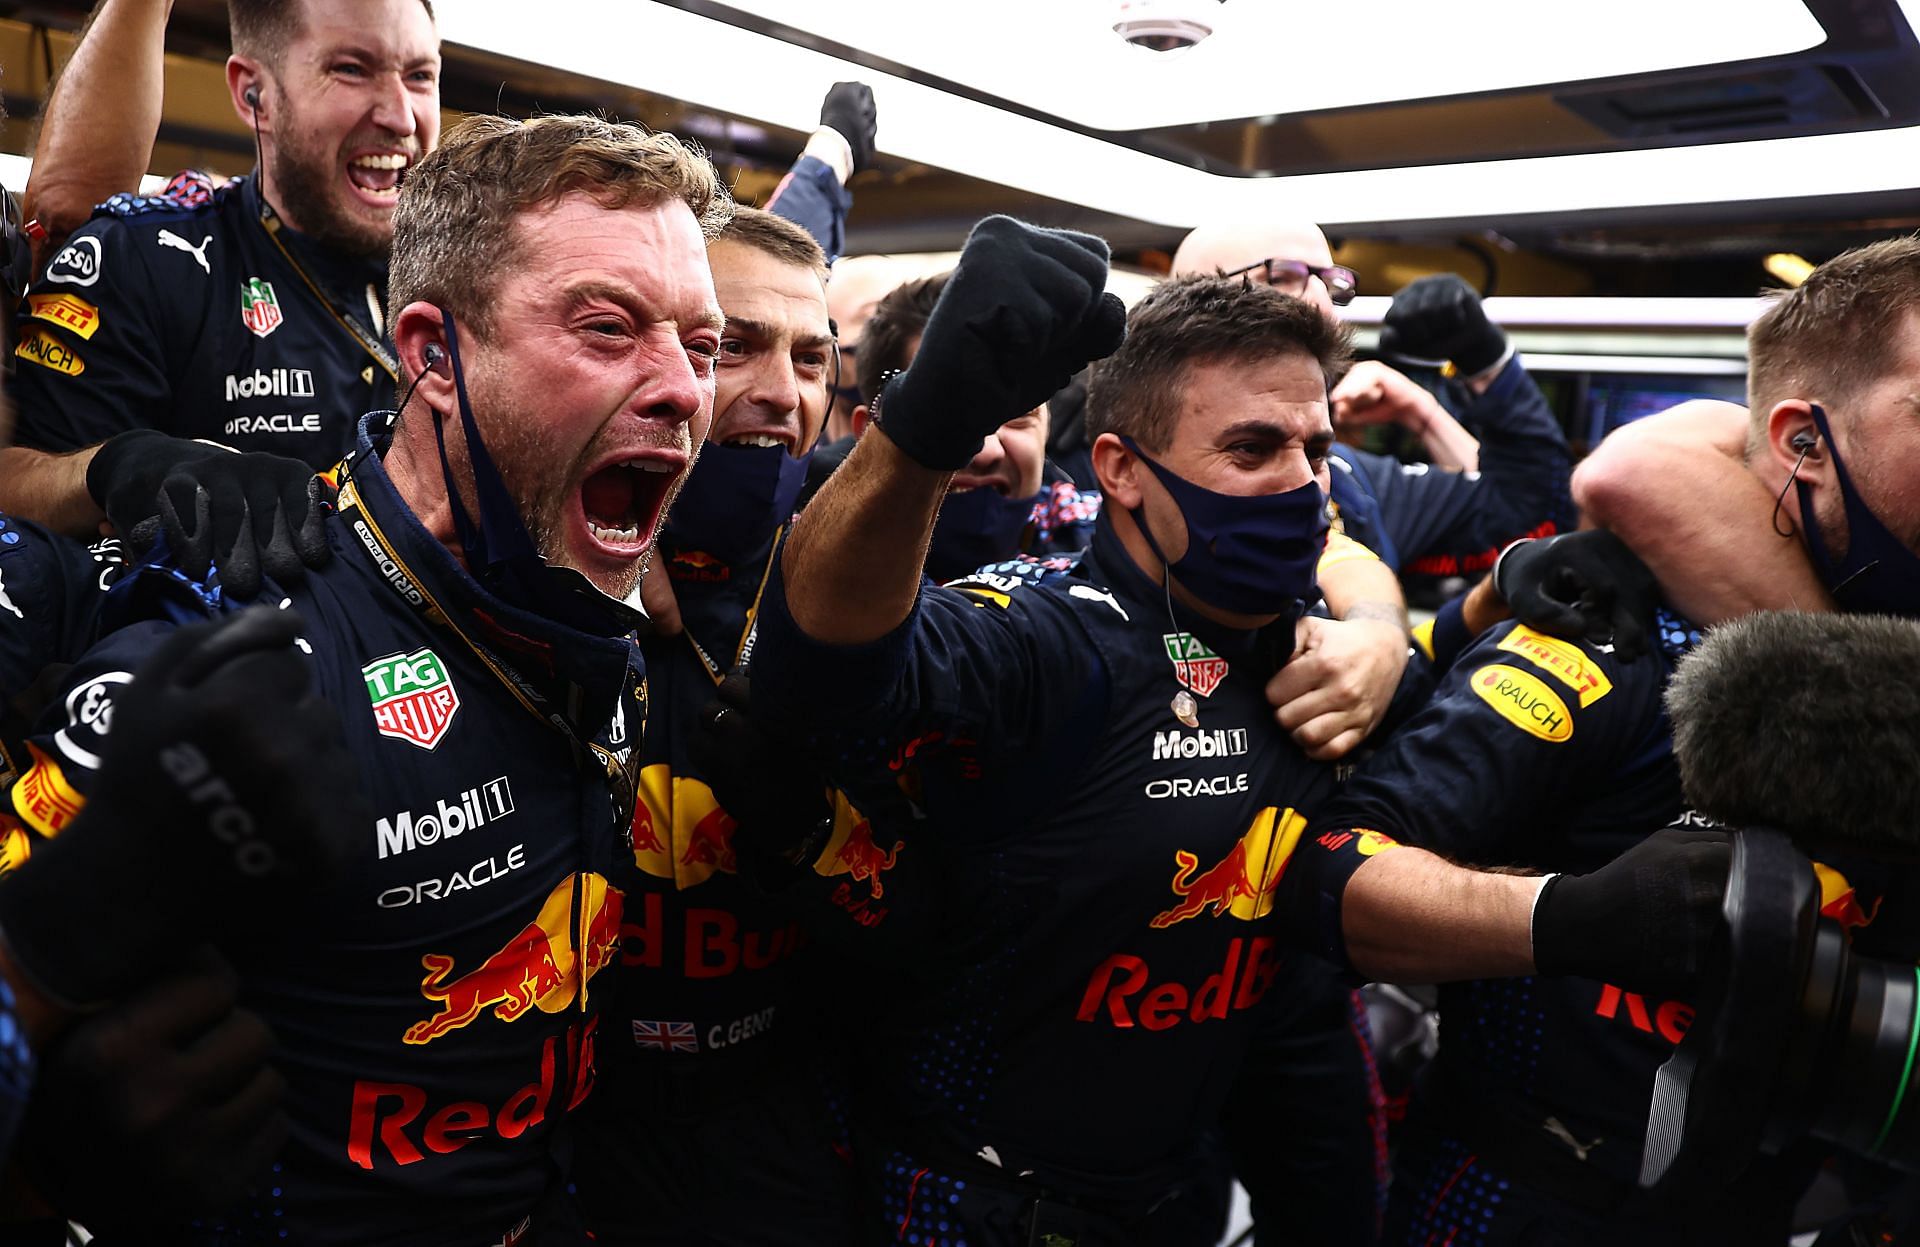 The Red Bull garage erupted with joy as Max Verstappen passed Lewis Hamilton for the lead at the 2021 Abu Dhabi Grand Prix